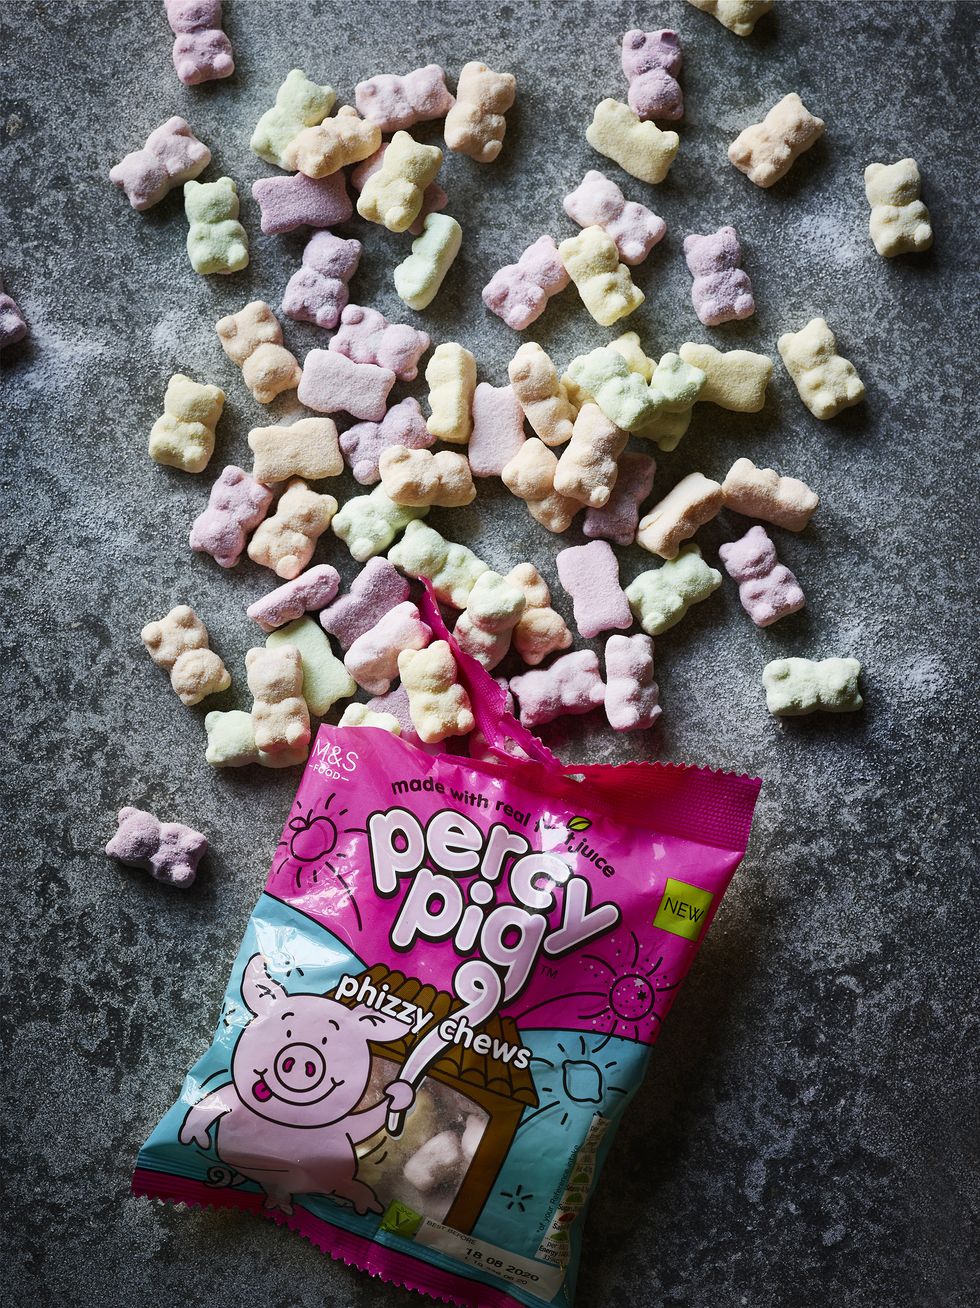 Marks & Spencer Percy Pig Phizzy Chews